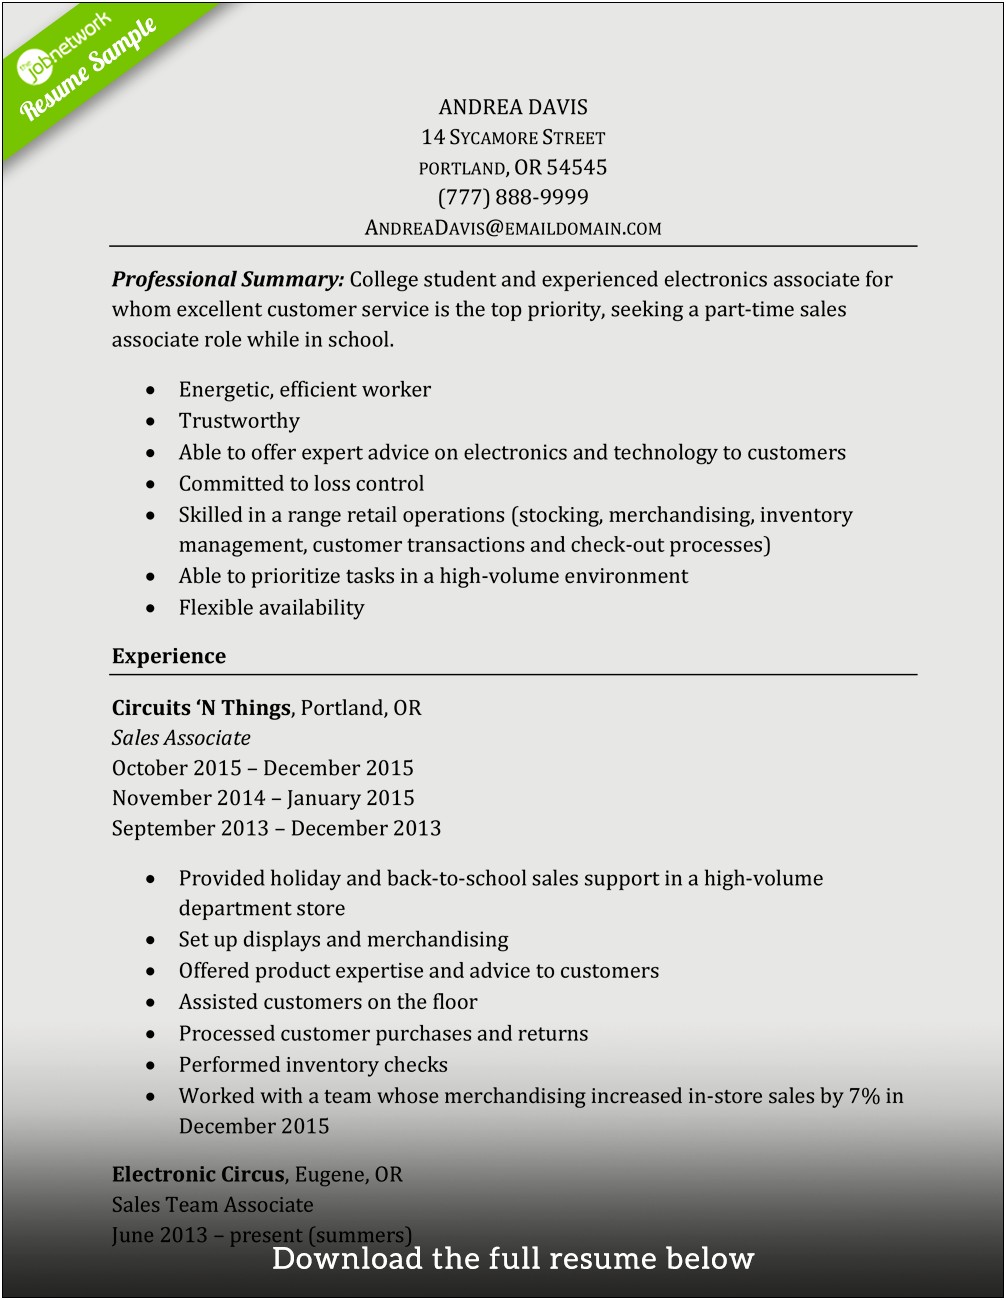 General Resume Objective Examples For Sales Associate